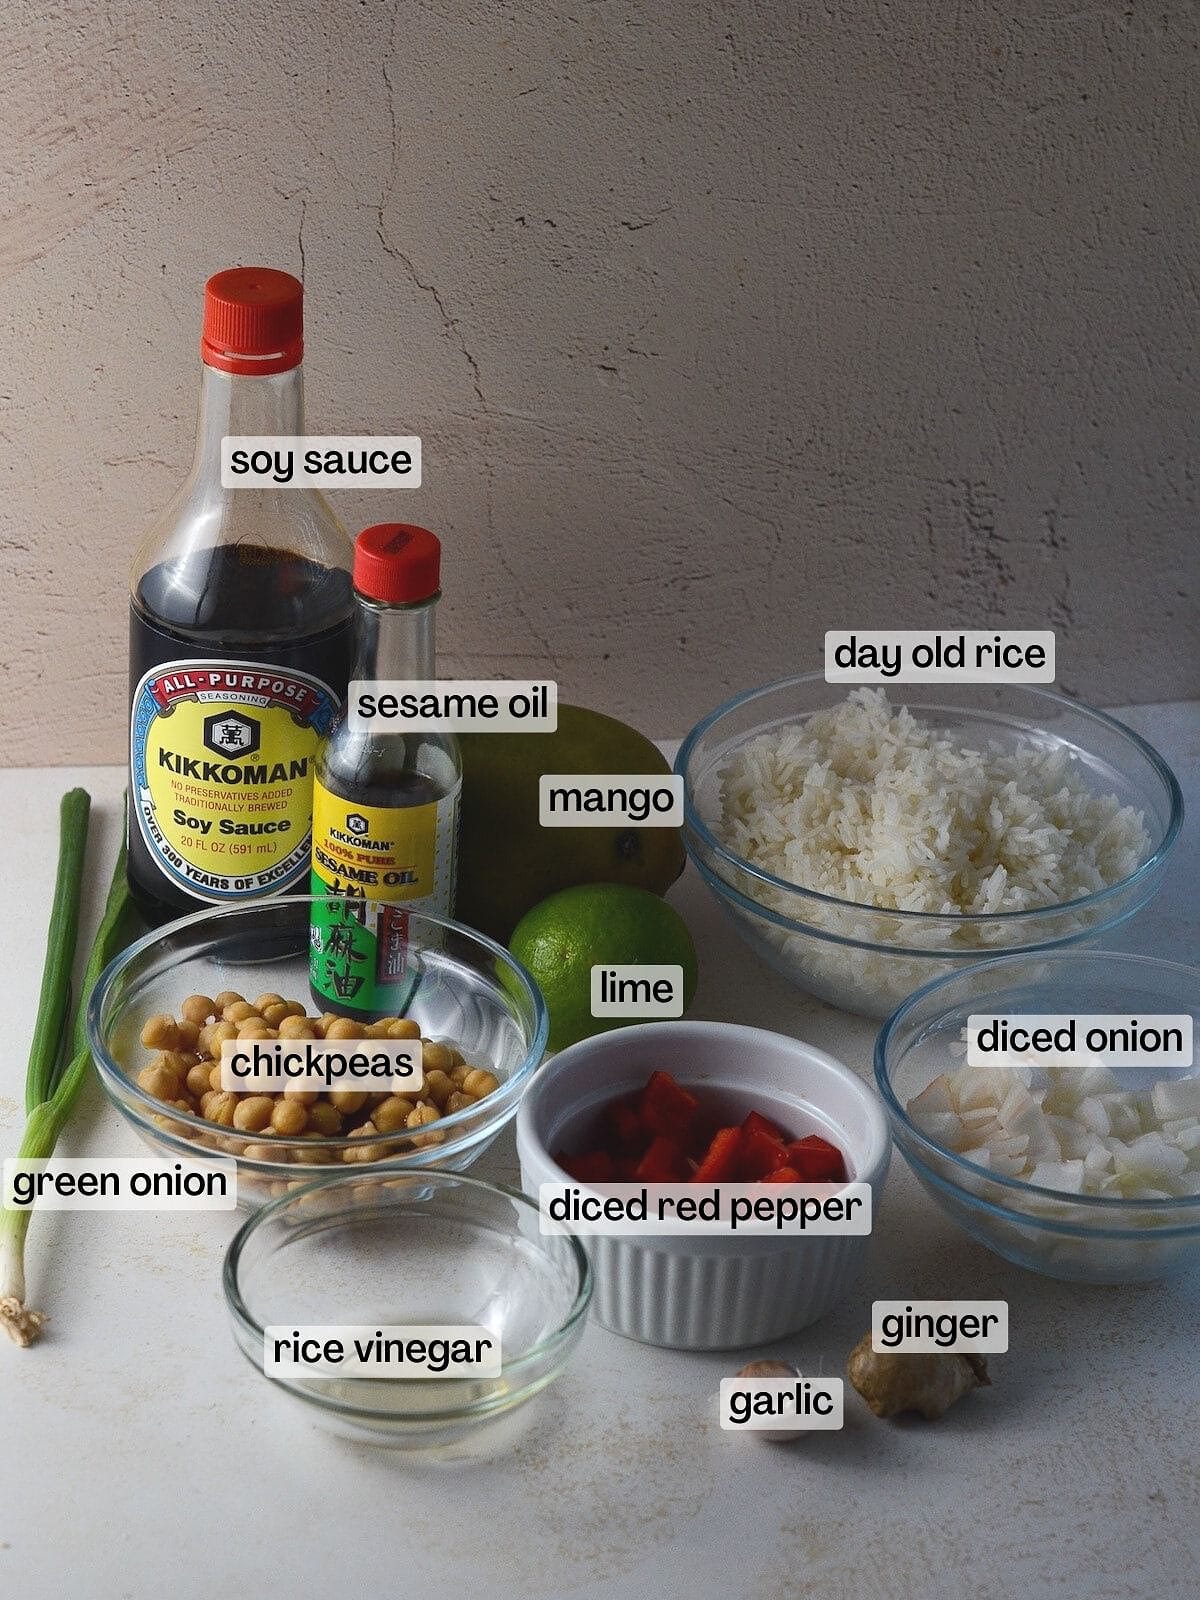 This is a photo of the ingredients for mango fried rice.